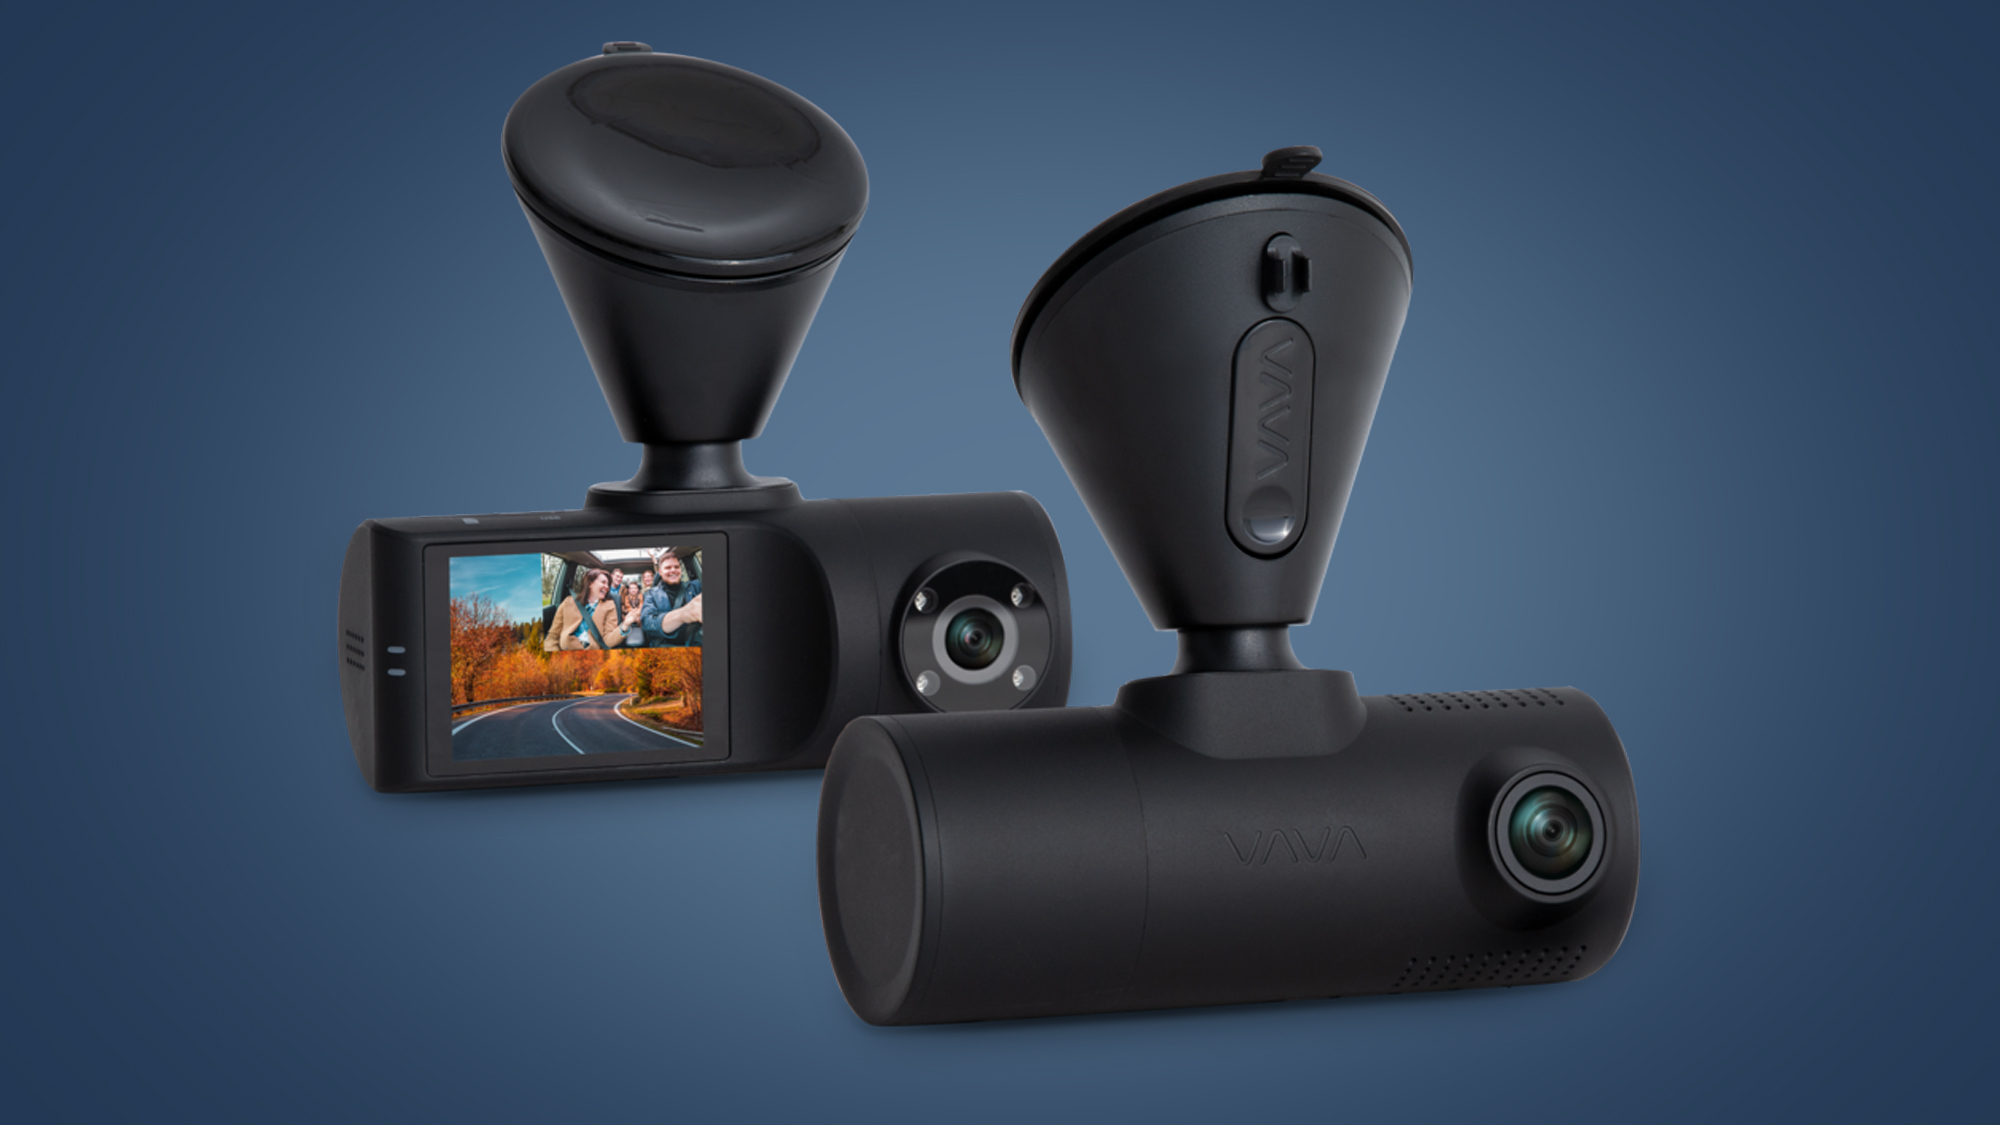 The front and rear cameras of the Vava 2K Dual Dash, one of the best dash cam